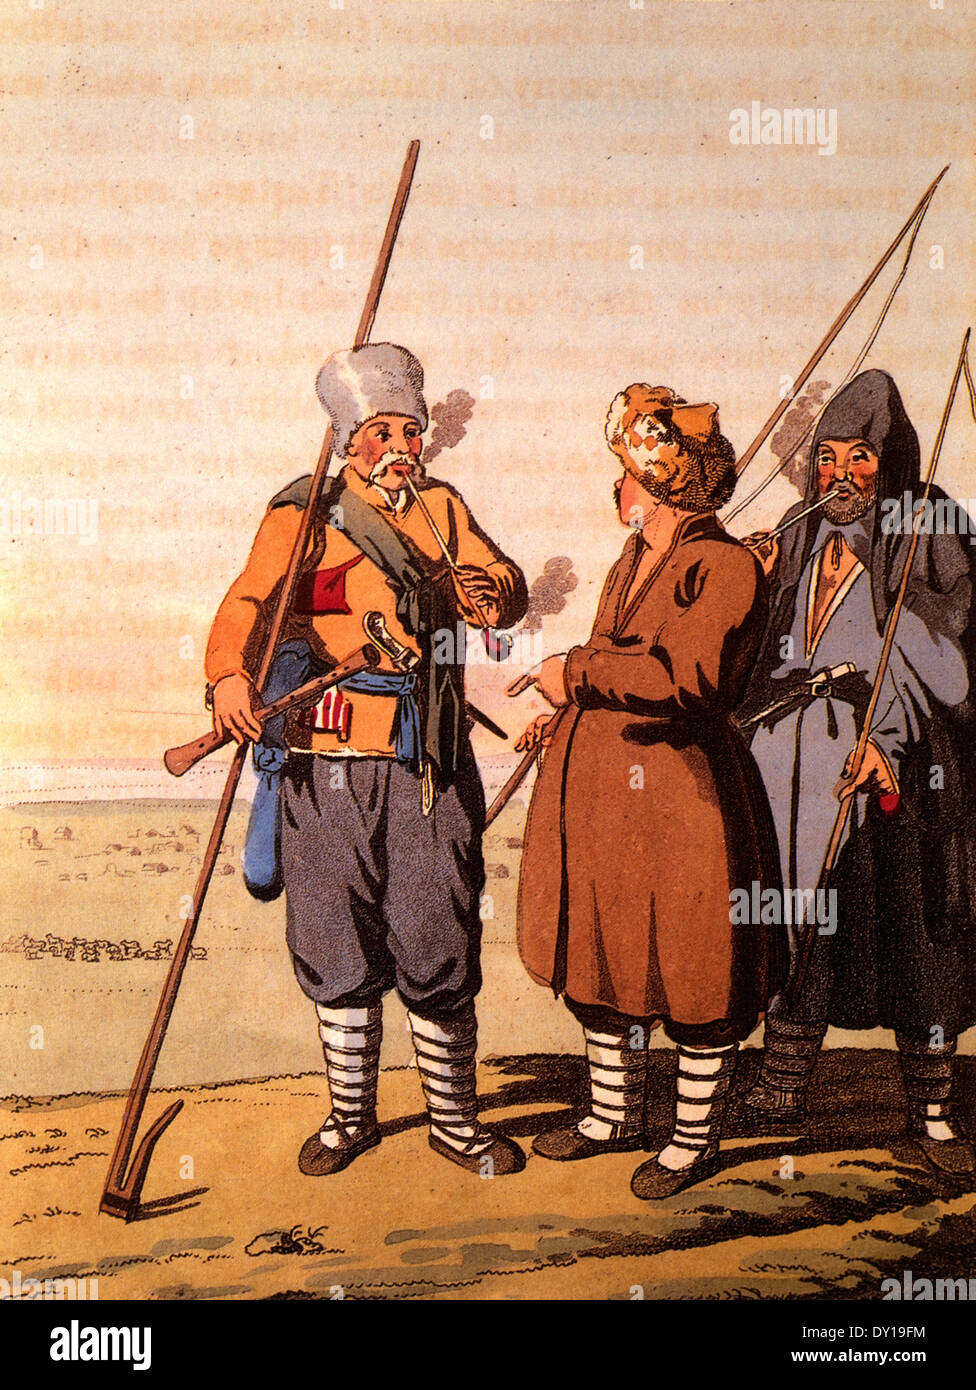 Tartar Shepherd with Two Men, from Travels Through the Southern Provinces of the Russian Empire in the Years 1793 & 1794 Stock Photo